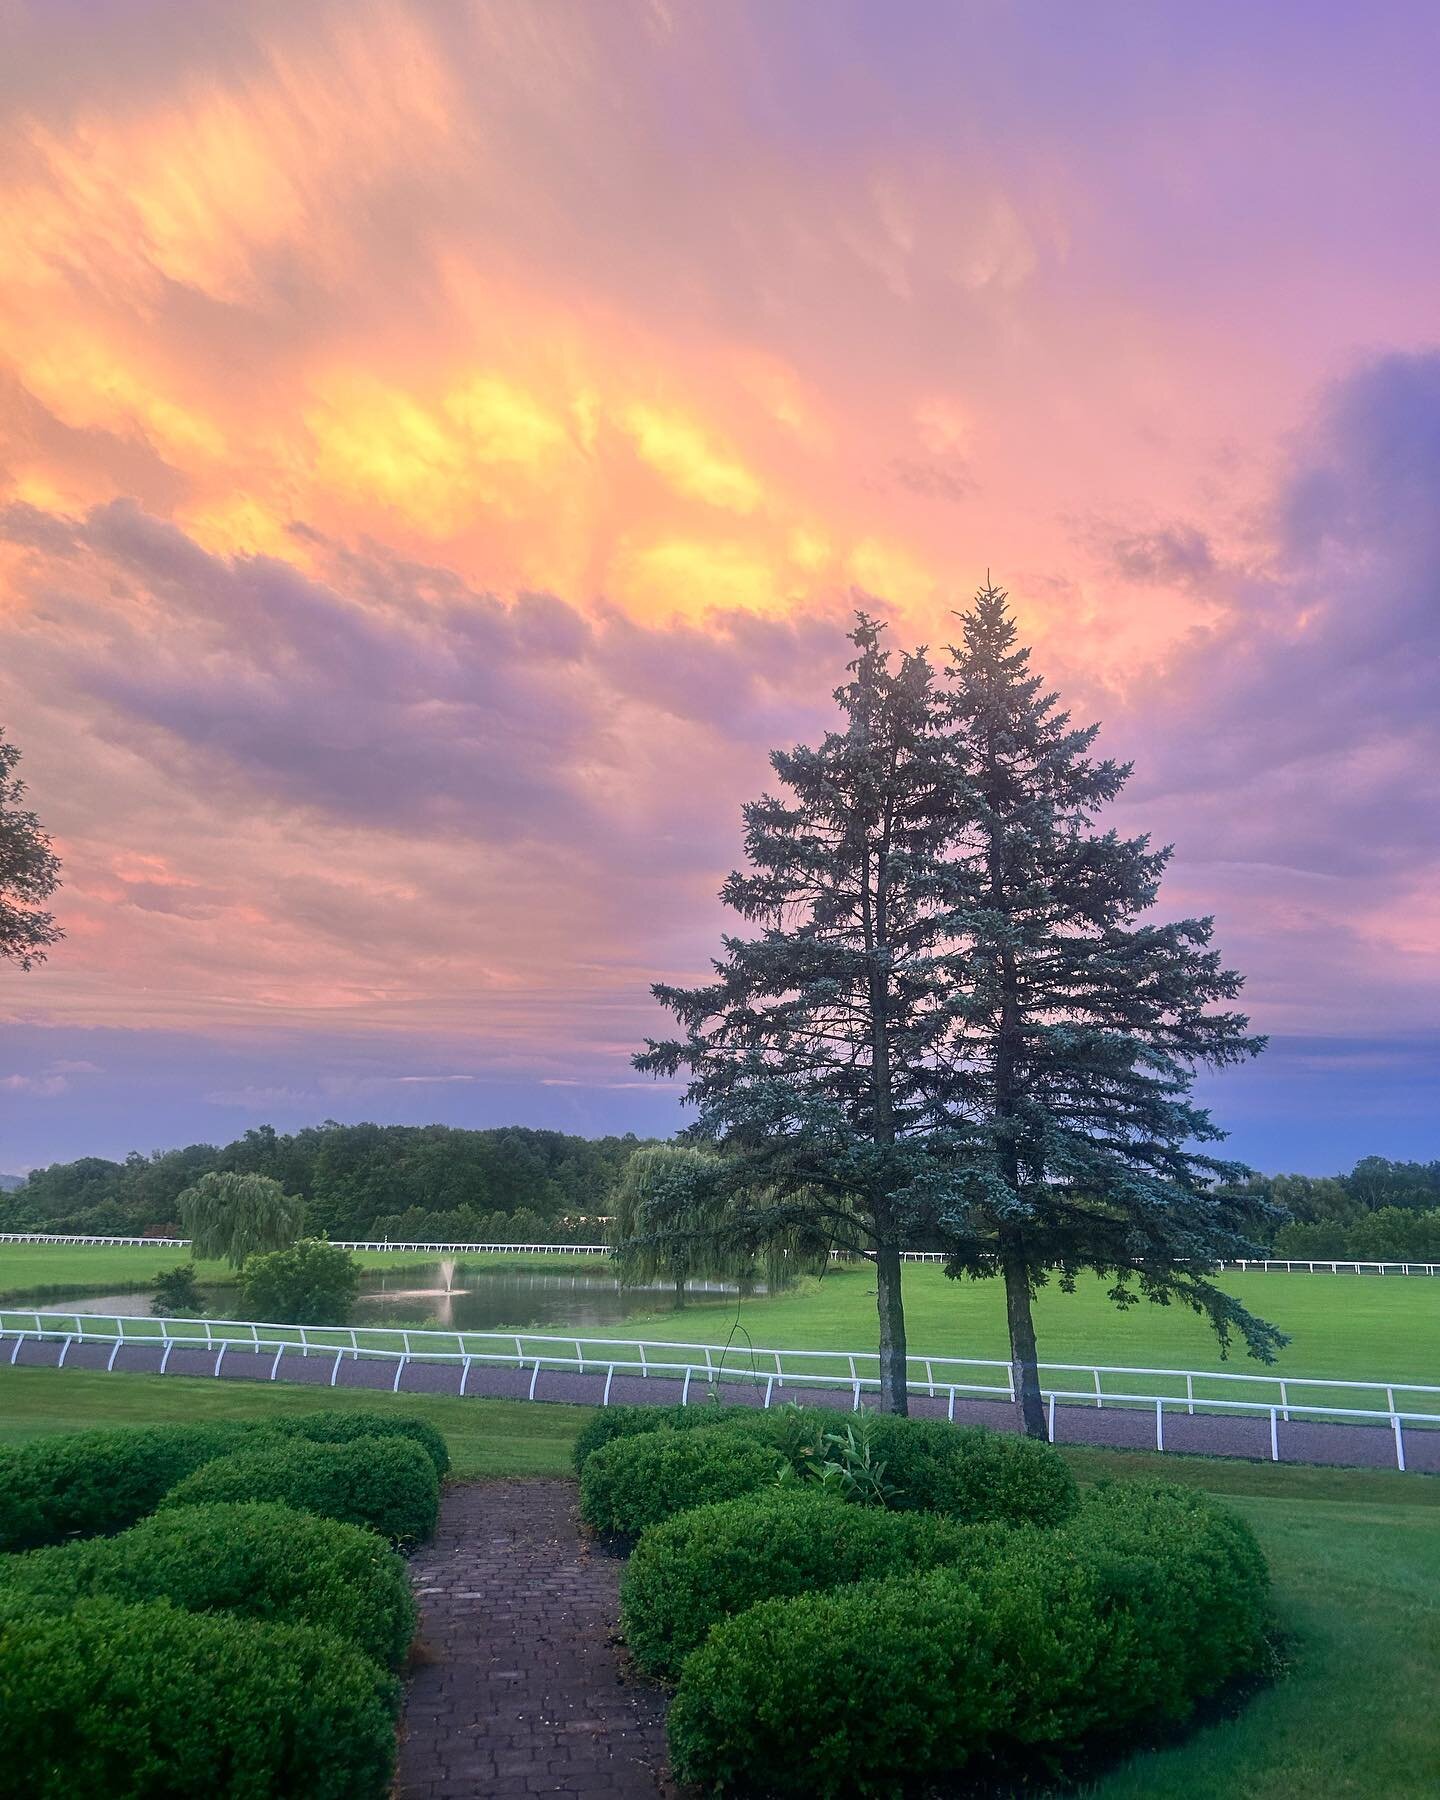 A view of our training track at Sacred and GMP Farm. Just a couple more days to grab your spot at our Off-Broadway play SMALL here at the farm on Tuesday, July 18th. The play is written and performed by a former jockey, Robert Montano and all proceed